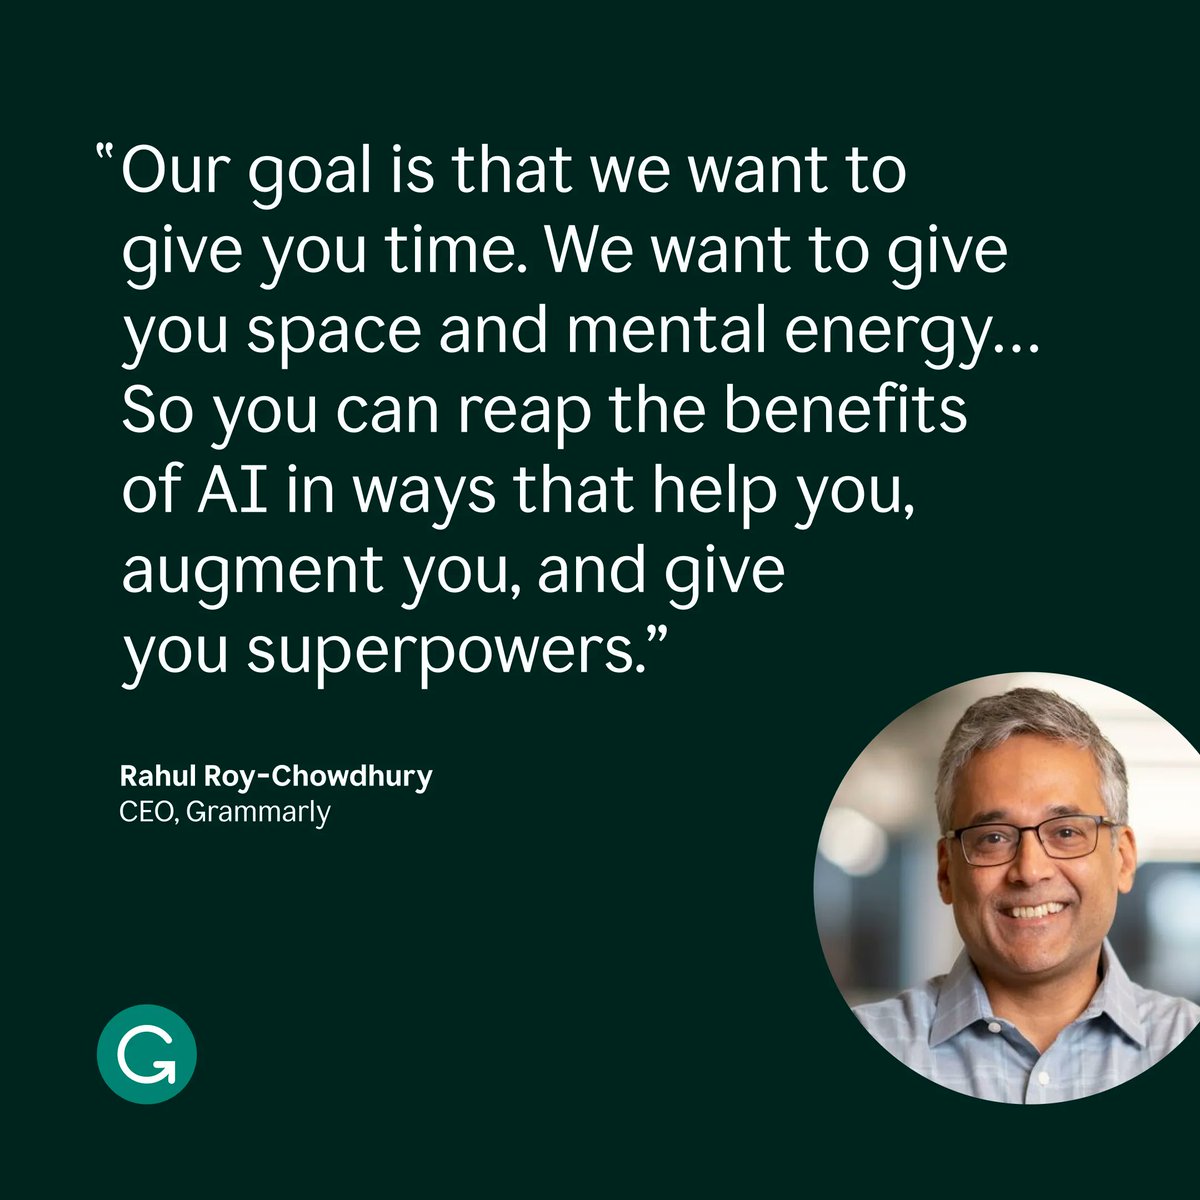 A highlight during the Grammarly Keynote a few weeks ago was hearing Rahul’s vision for Grammarly.

The software is well-positioned in a growing market of workplace efficiency, and its potential to augment communication is exciting to be a part of.

#GrammarlyKeynote @Grammarly